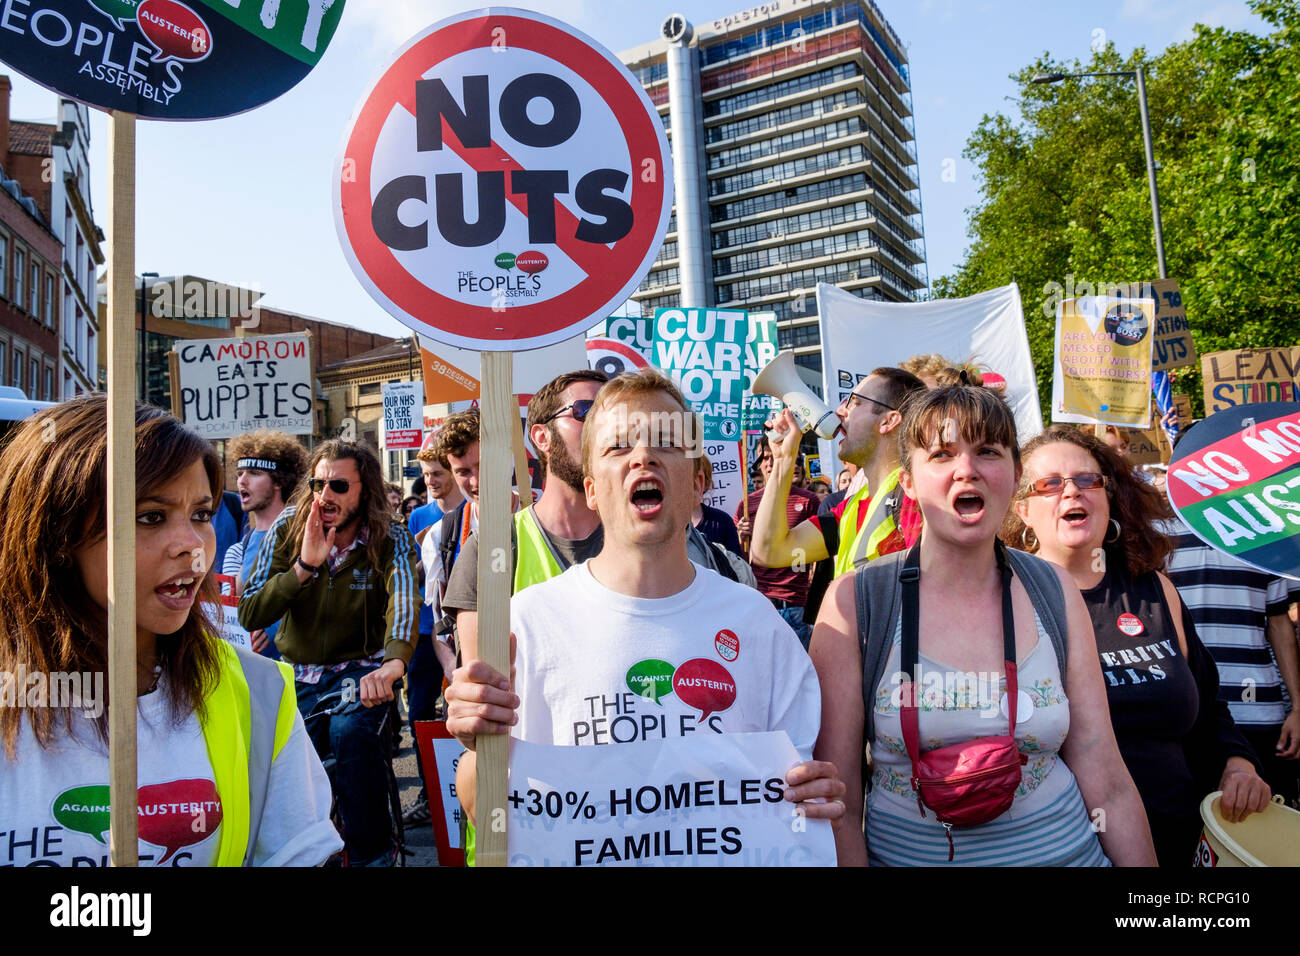 Protesters carrying anti-austerity placards and signs are pictured taking part in an anti-austerity protest march and demonstration in Bristol. Stock Photo